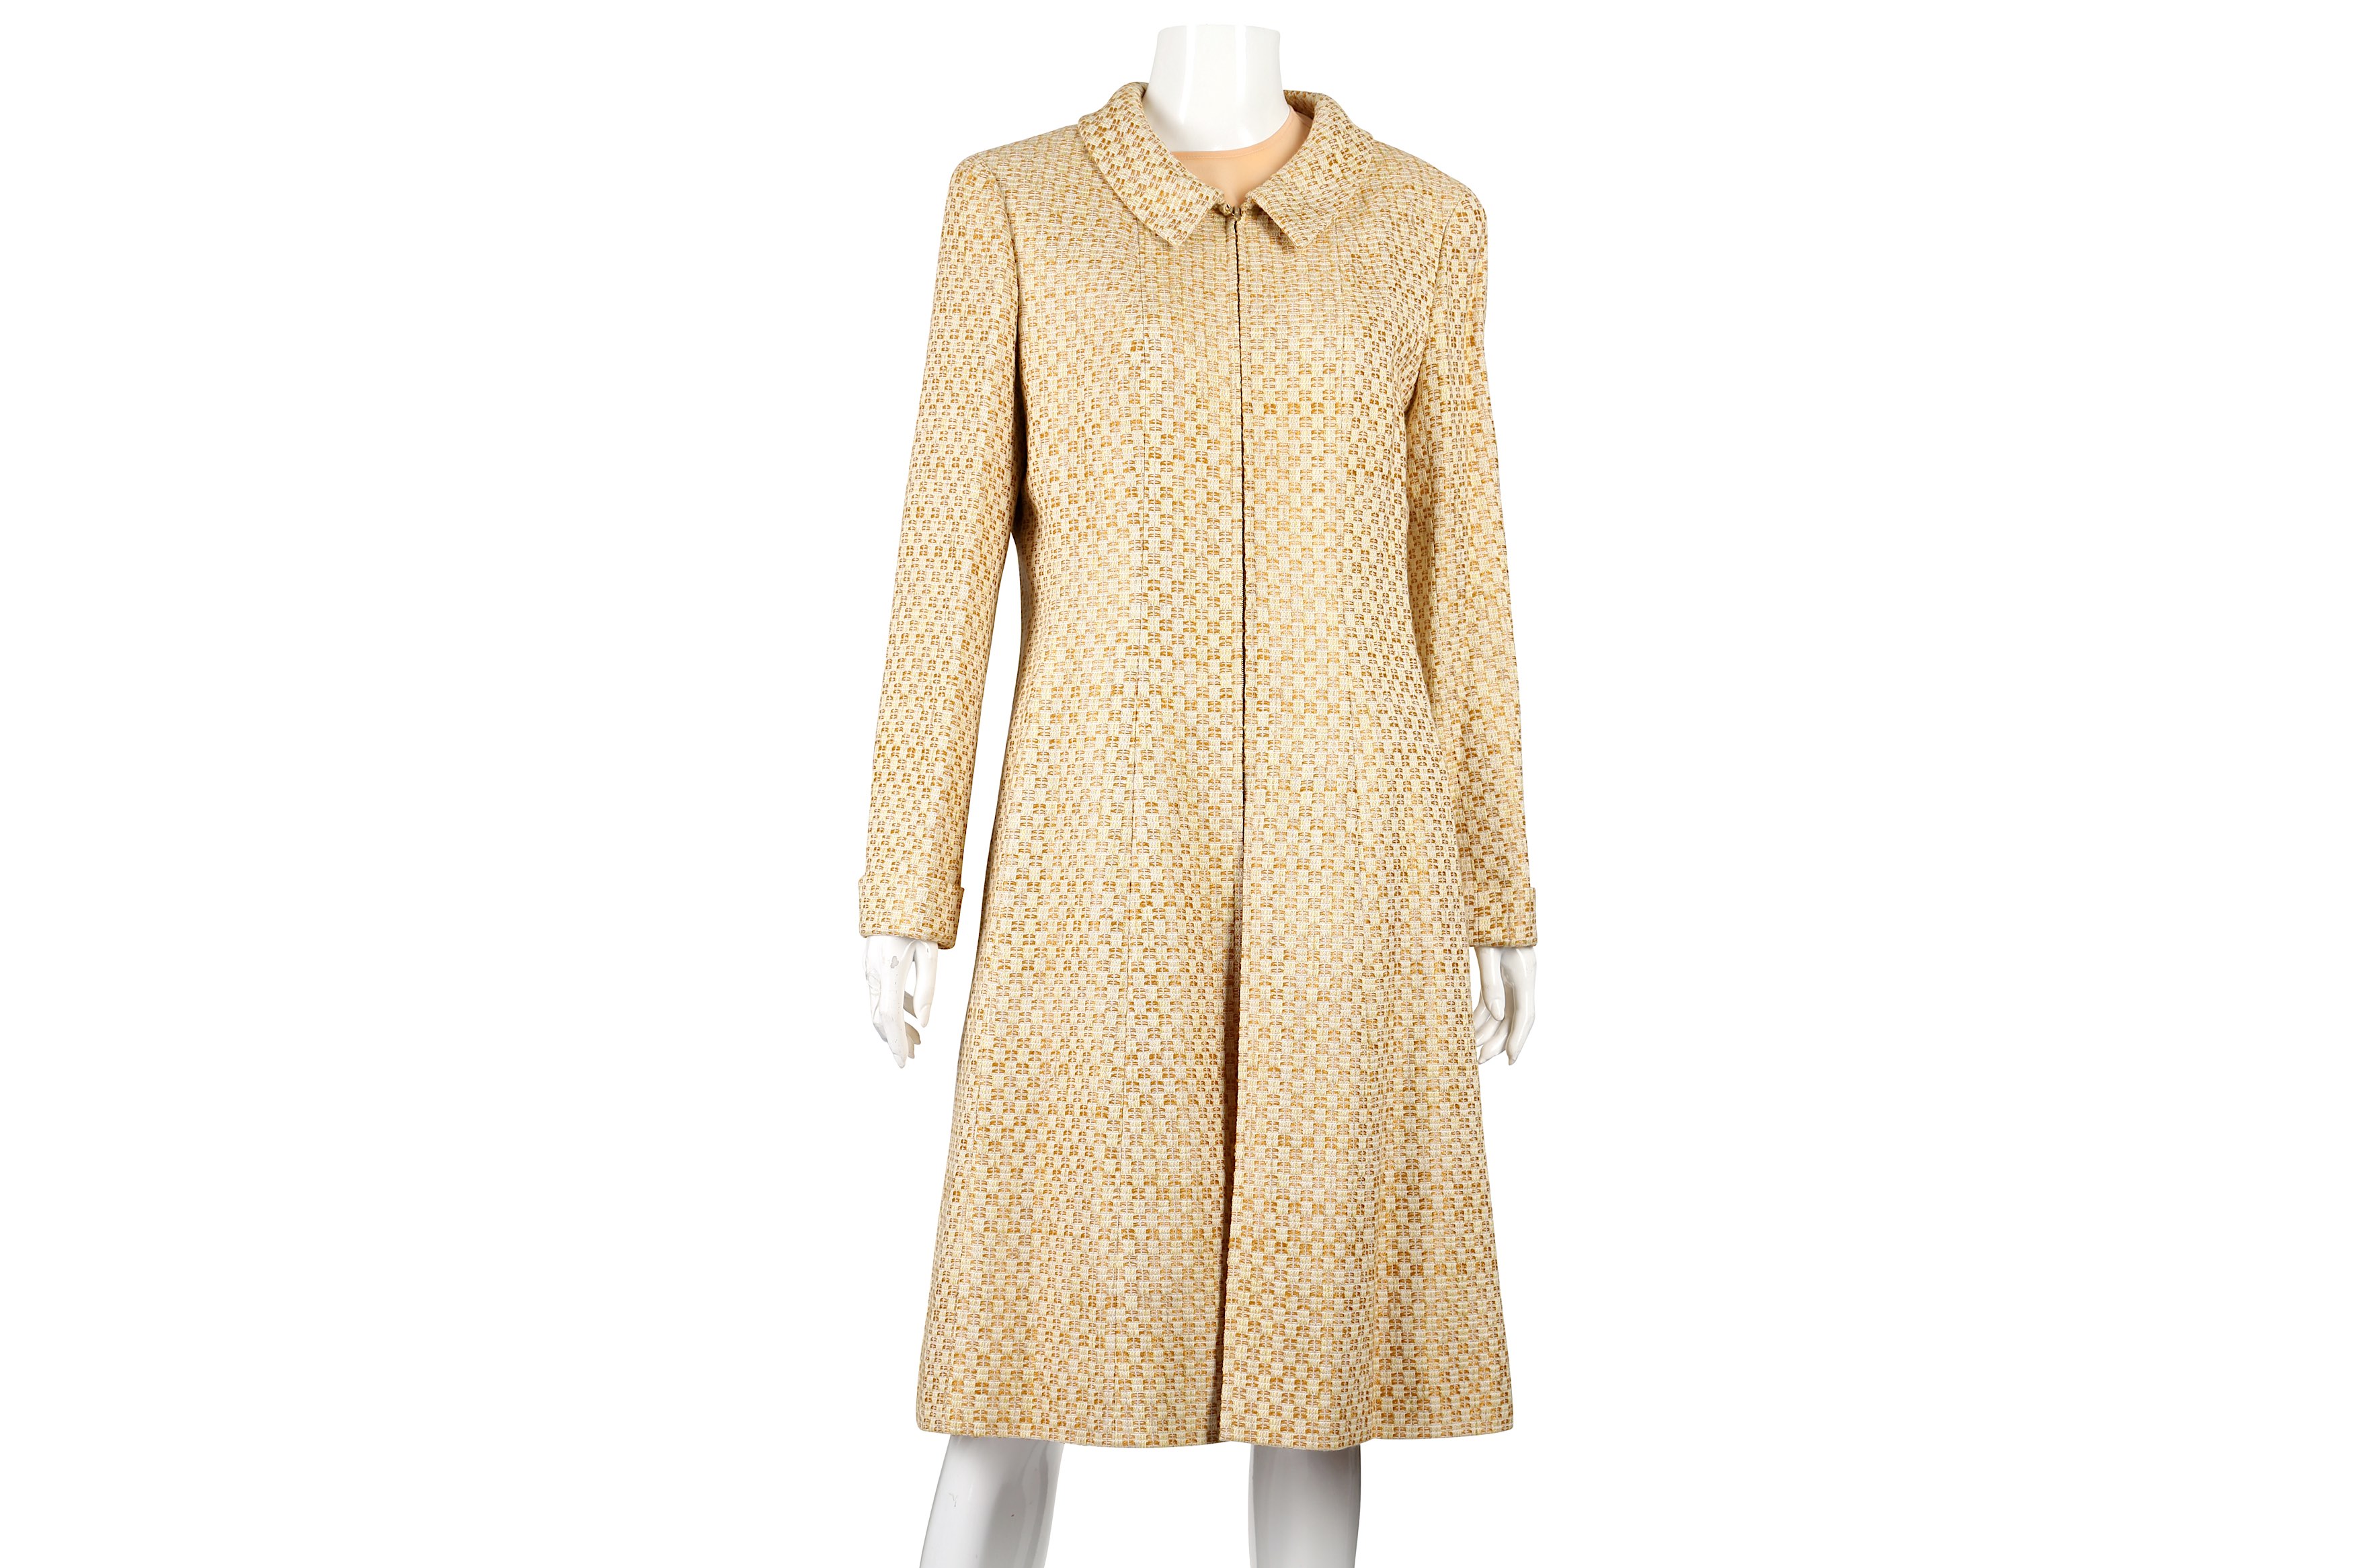 Chanel Honey Tweed Dress and Coat Suit - Size 42